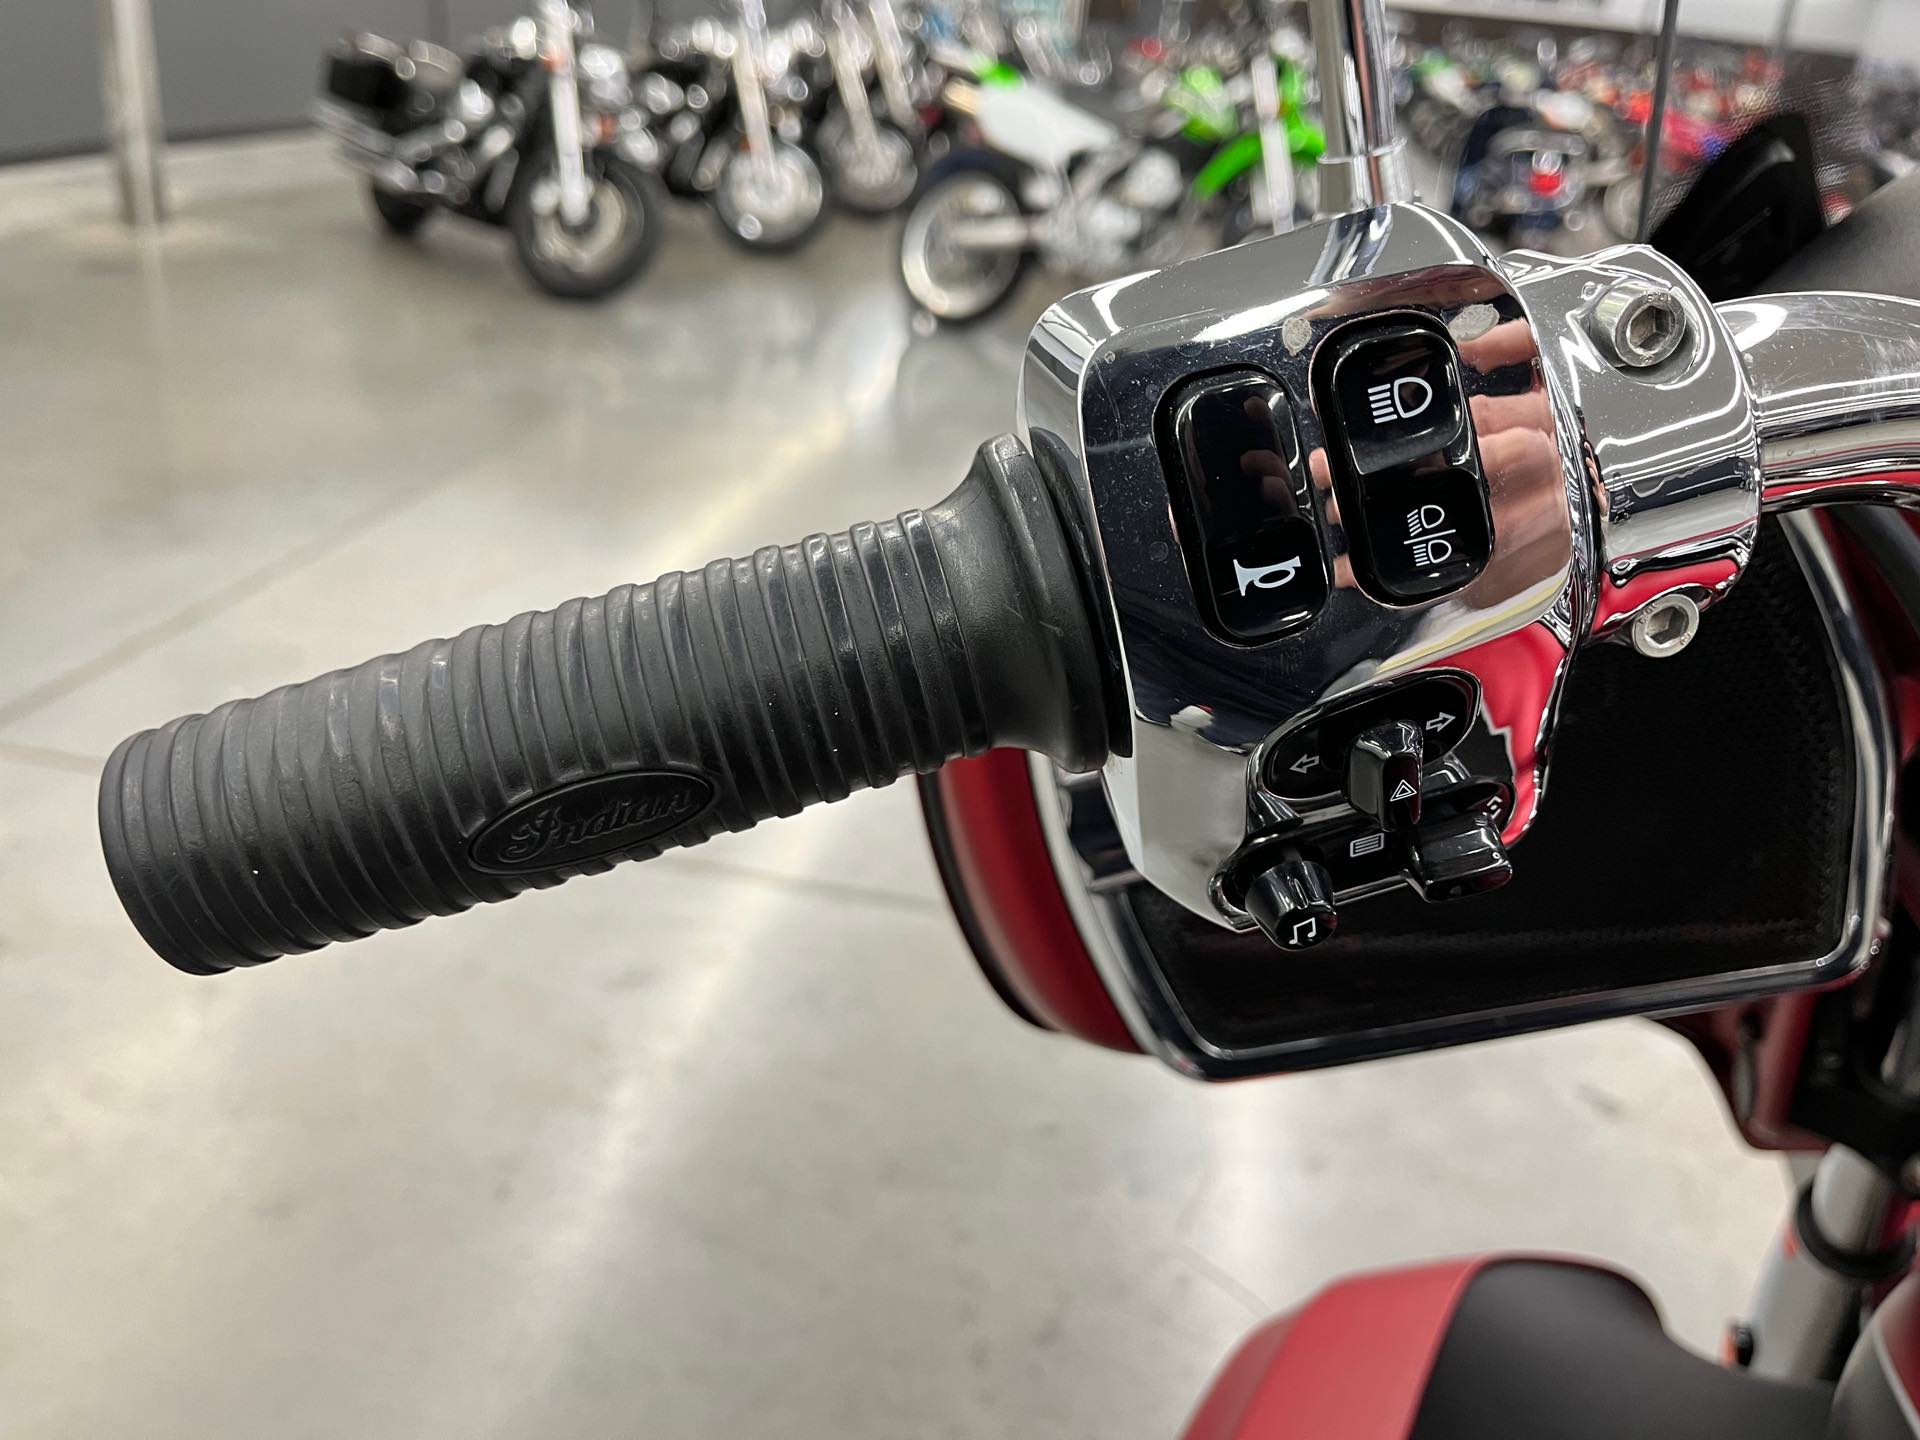 2019 Indian Motorcycle Roadmaster Base at Aces Motorcycles - Denver